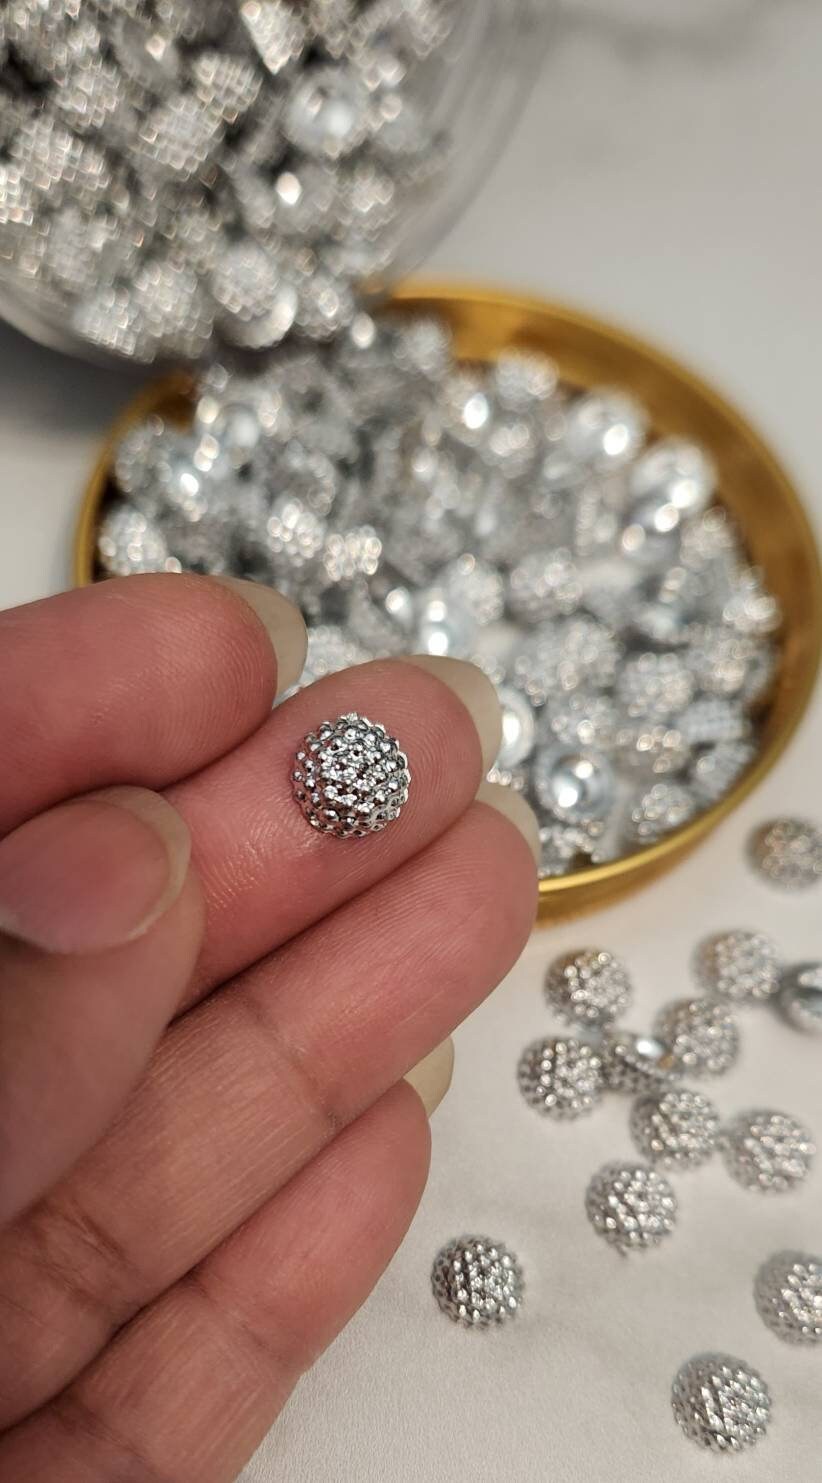 Bulk: 8MM "BLING BUD" Rivets + Pins,(3.5oz Jar) for Pearl Setting Machine, Clothing Decoration, Great For Denim, Fabric, Shoes, and more!